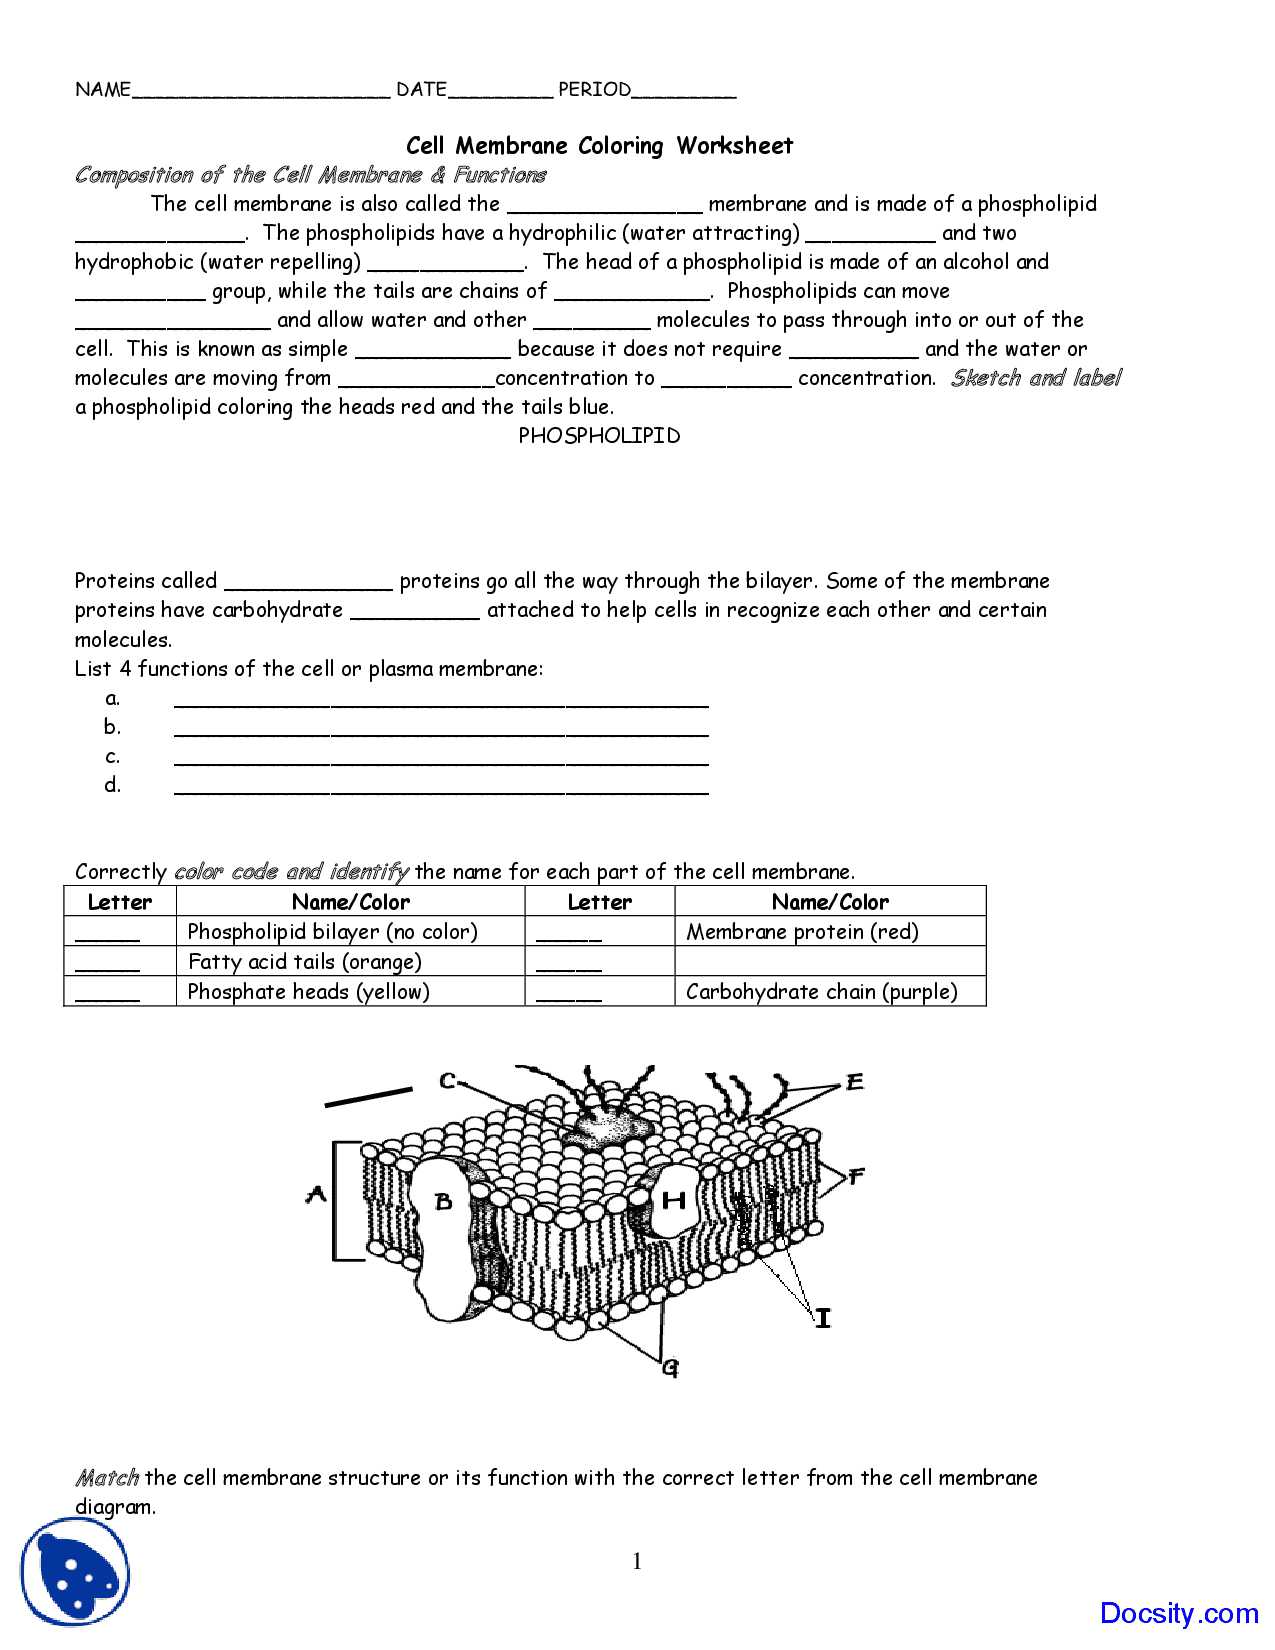 Dna Replication Coloring Worksheet Along with with Cell Membrane Coloring Worksheet Coloring Pages Answers